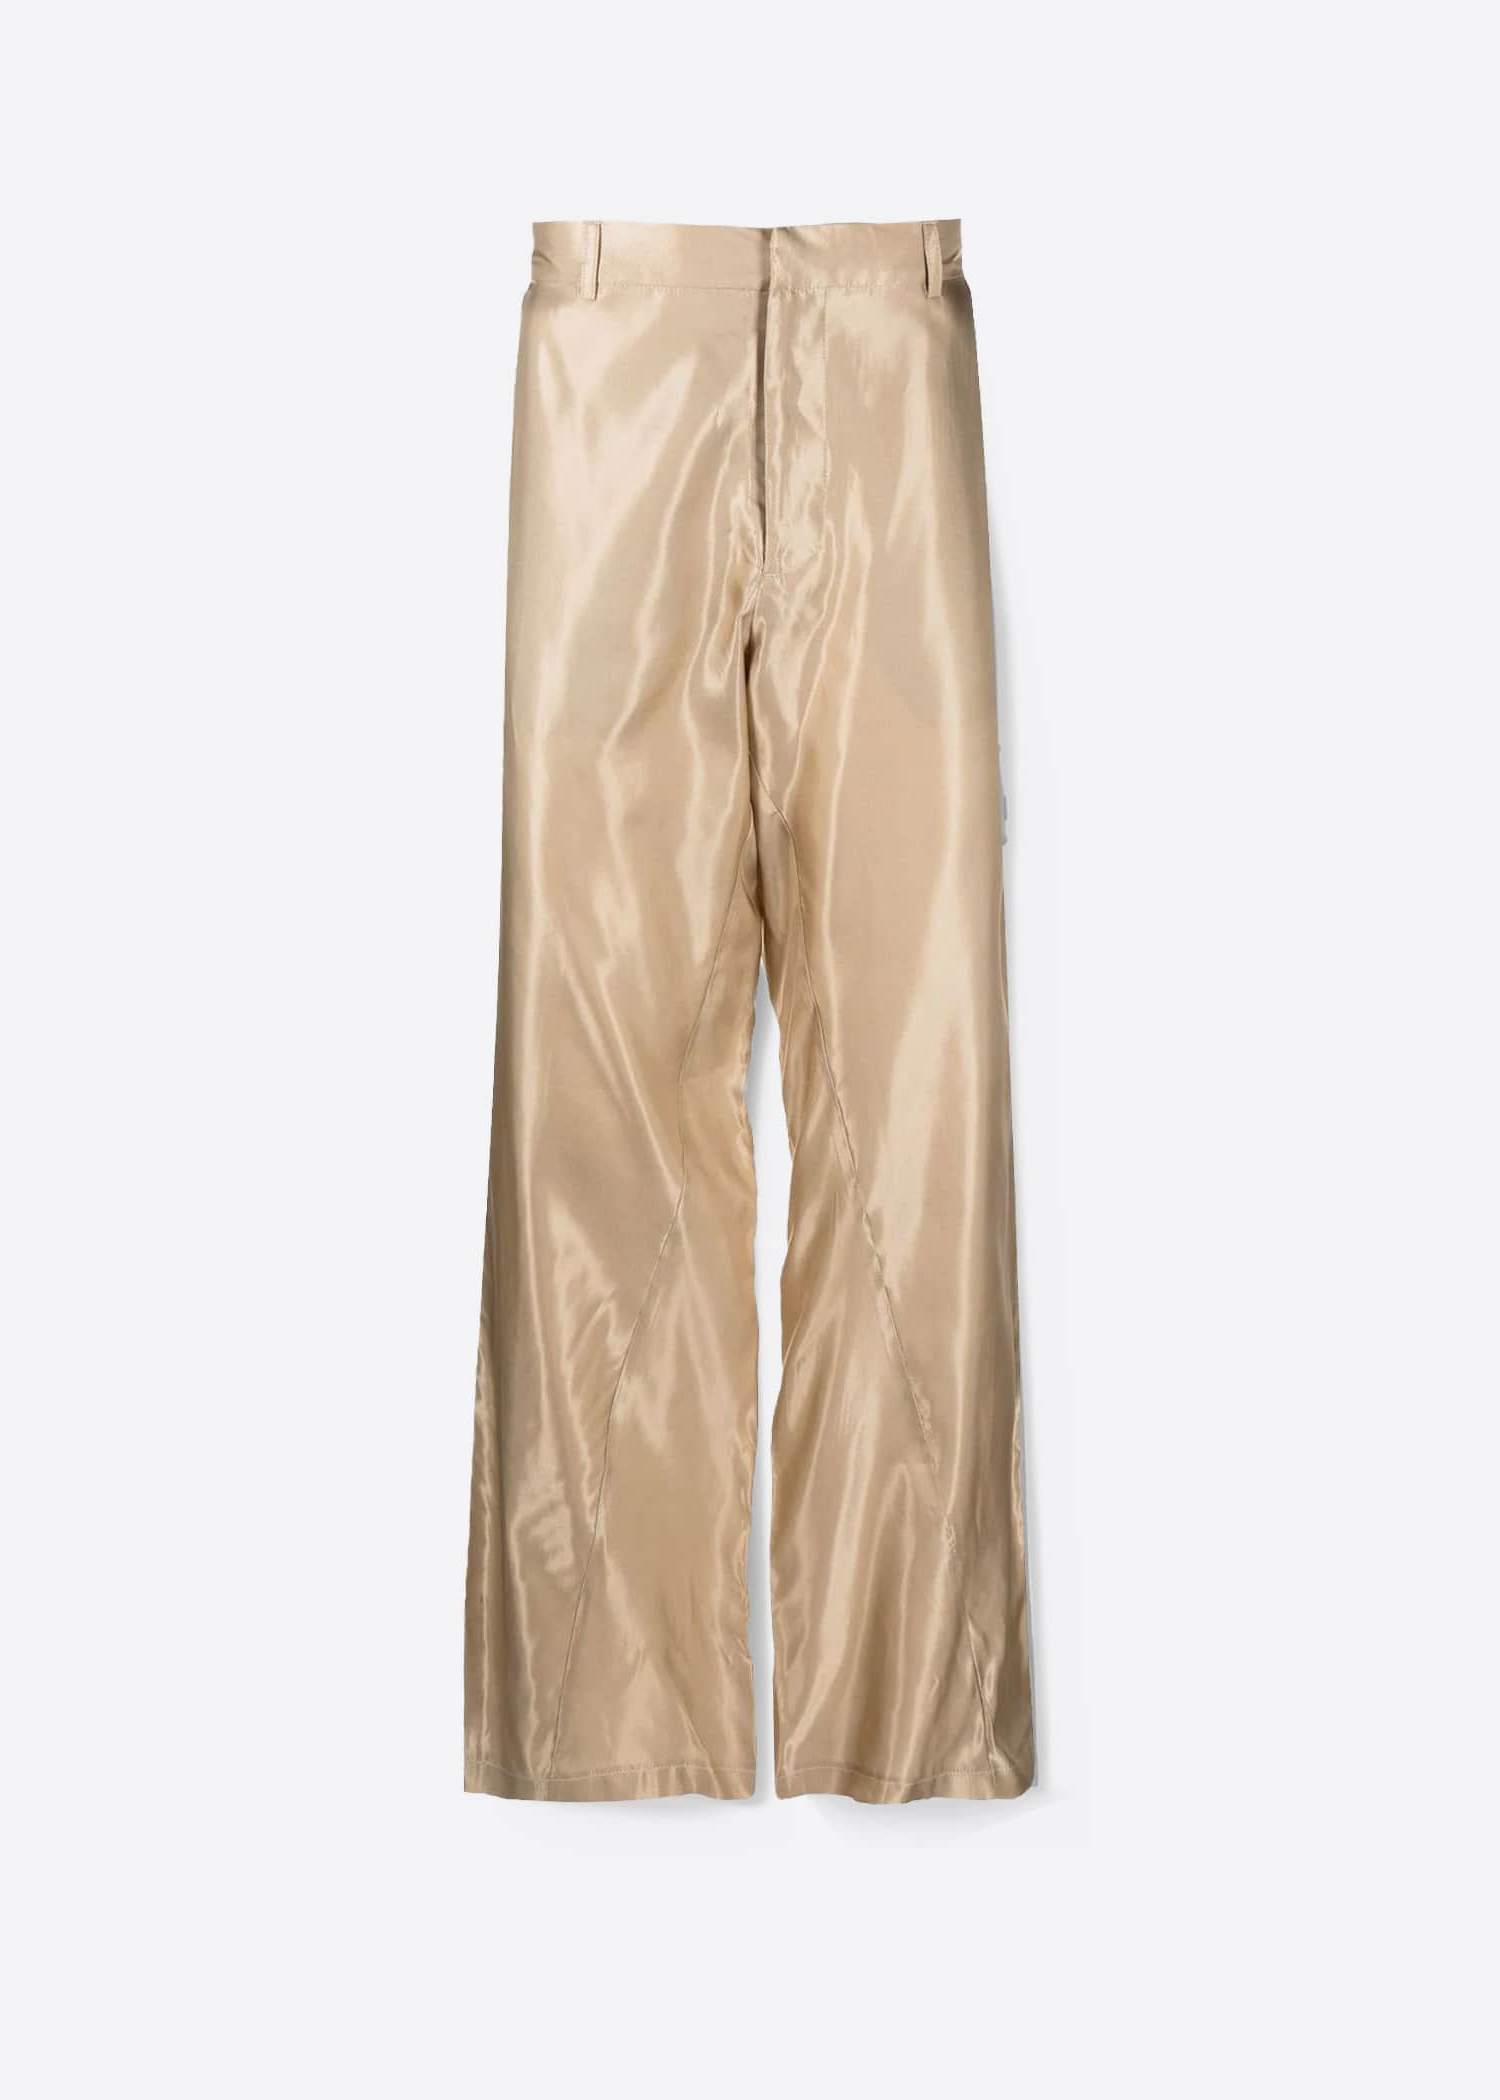 Bianca Saunders Bailey Trousers